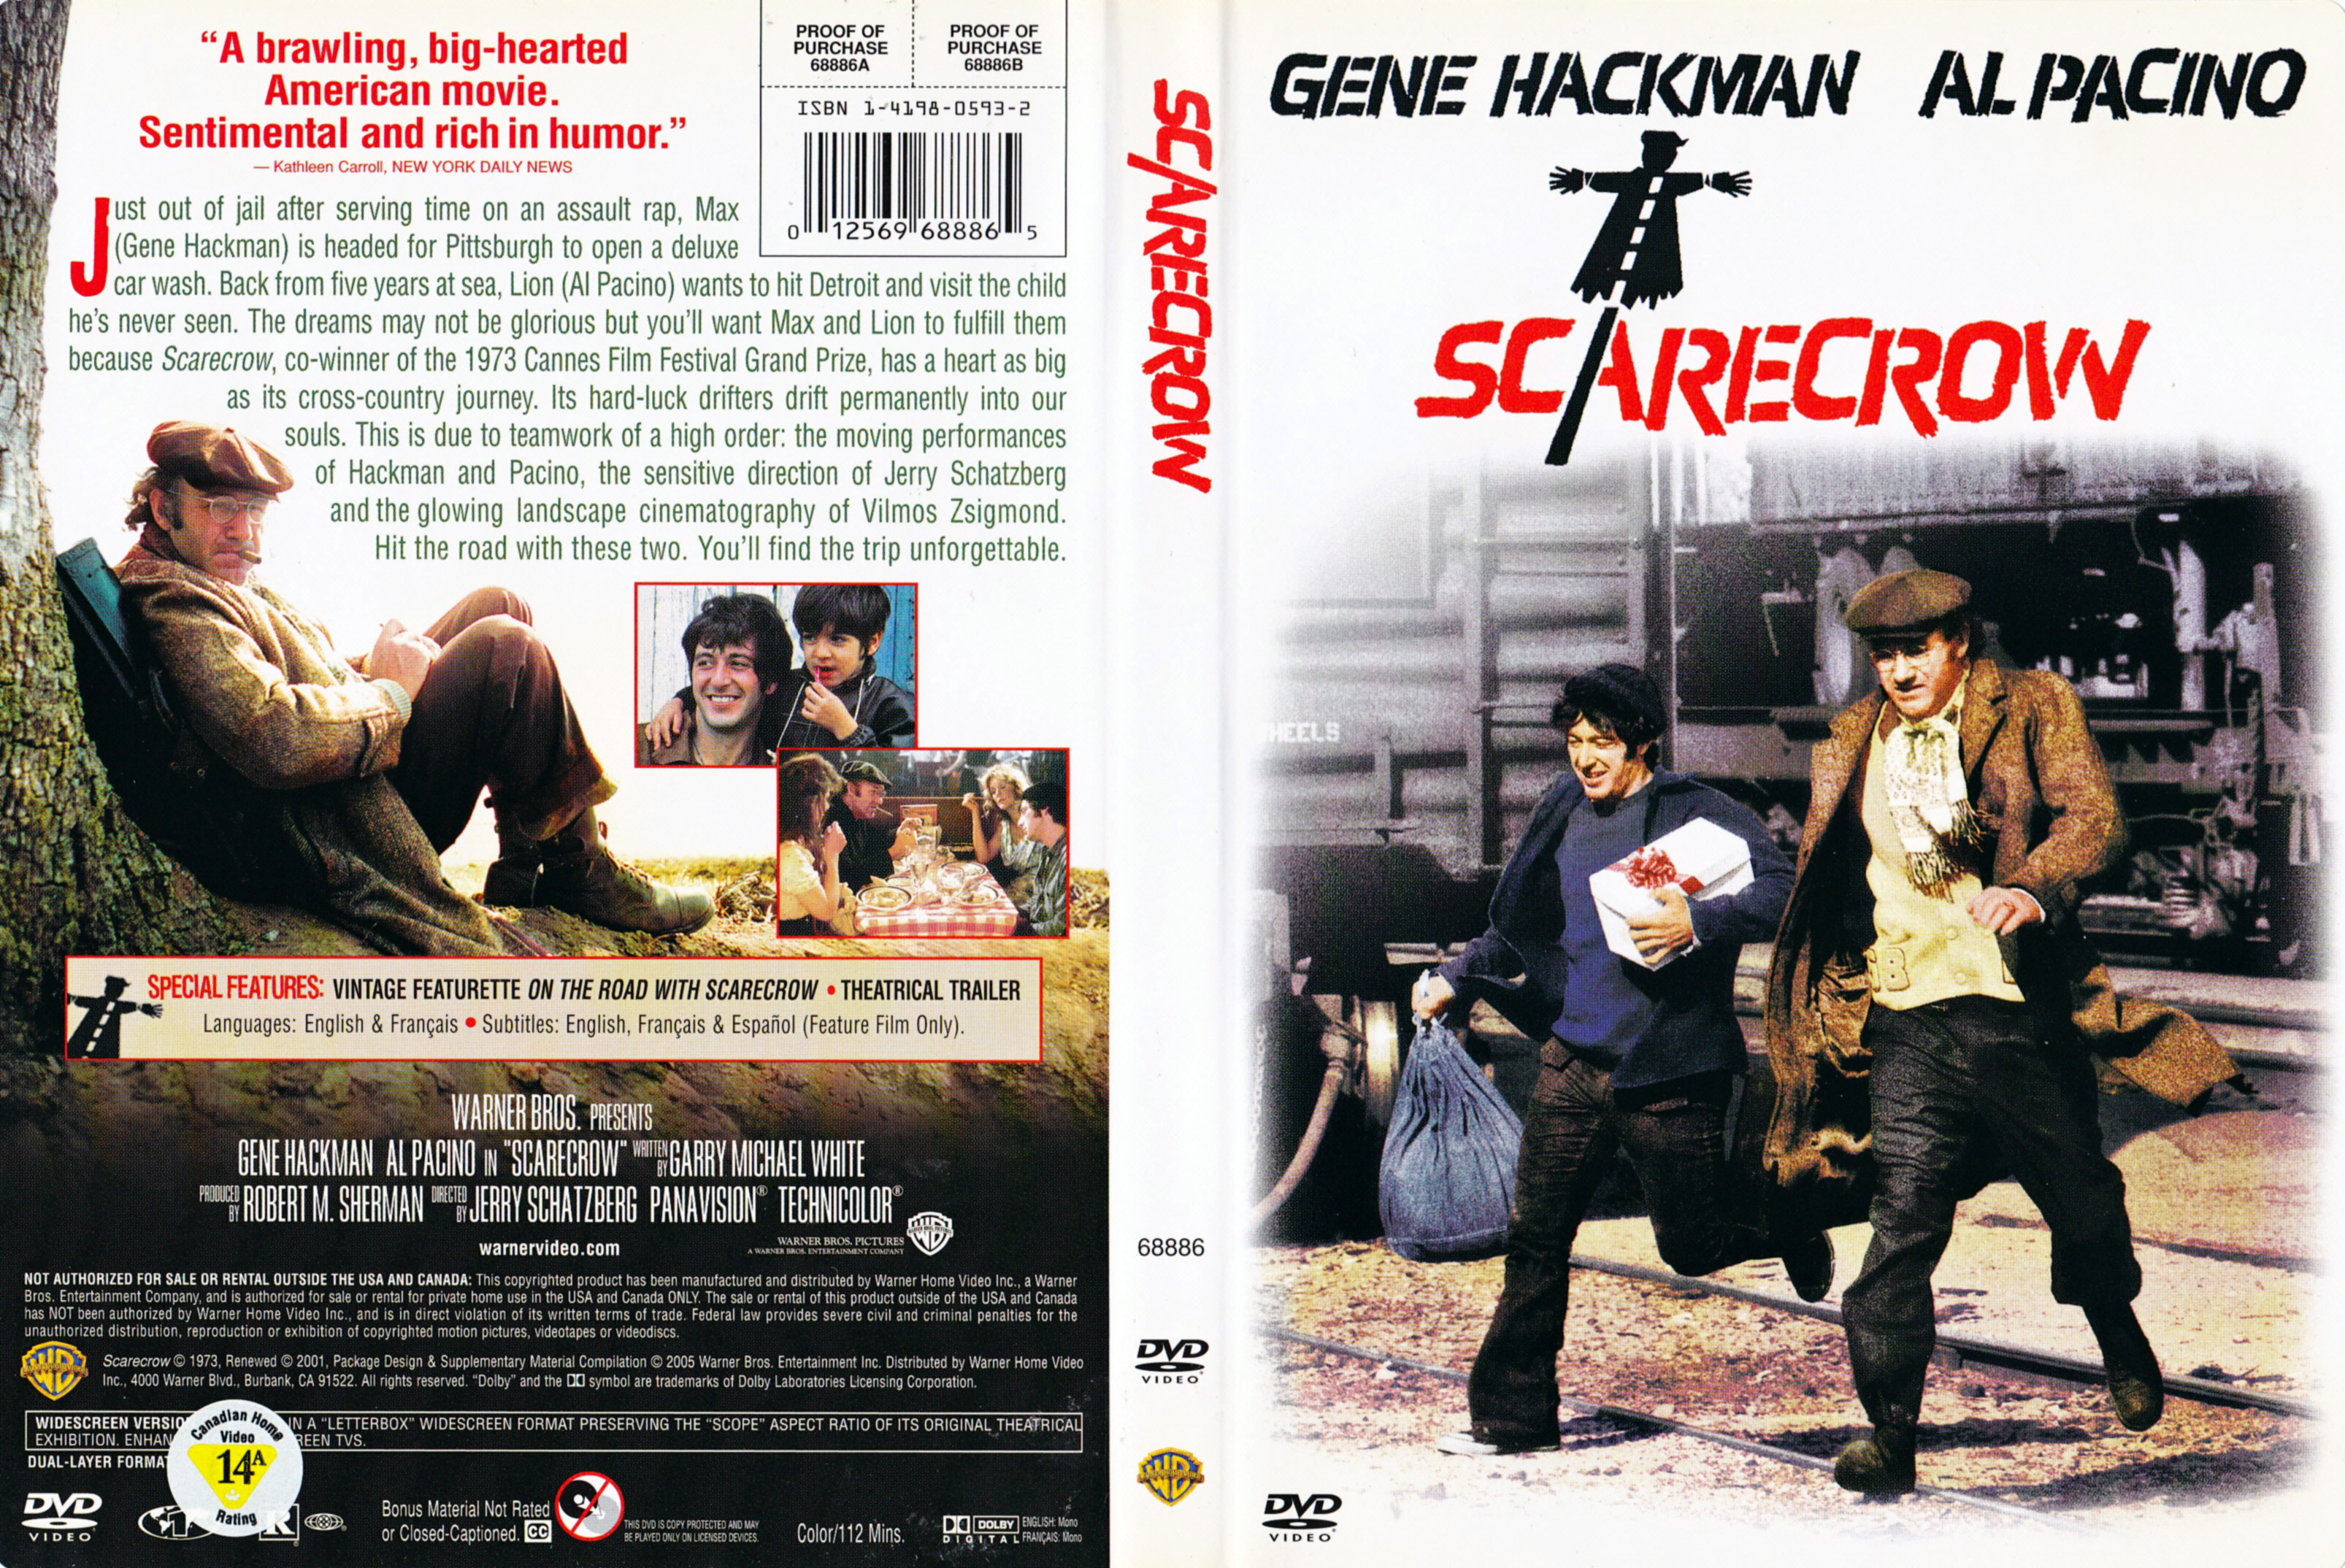 Jaquette DVD Scarecrow (Canadienne)